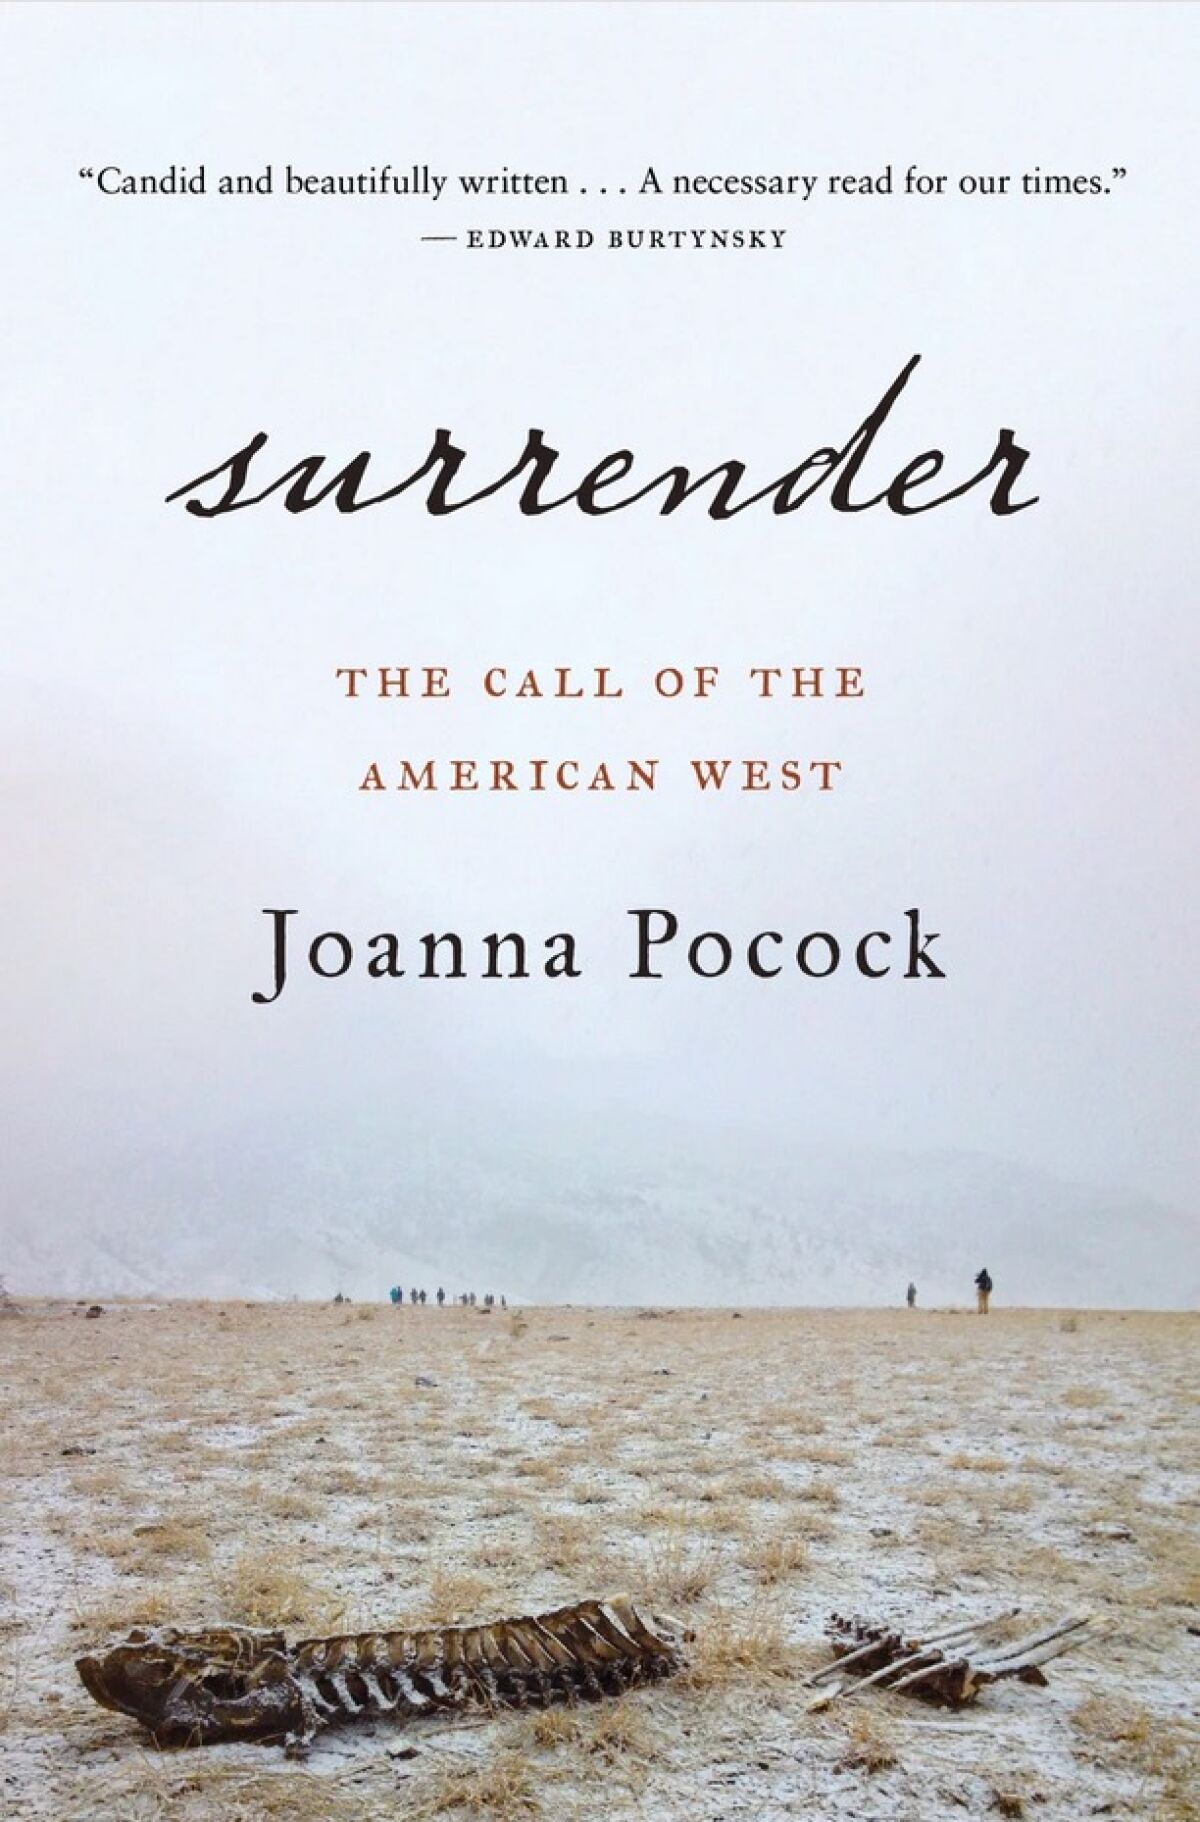 “Surrender: The Call of the American West” by Joanna Pocock.